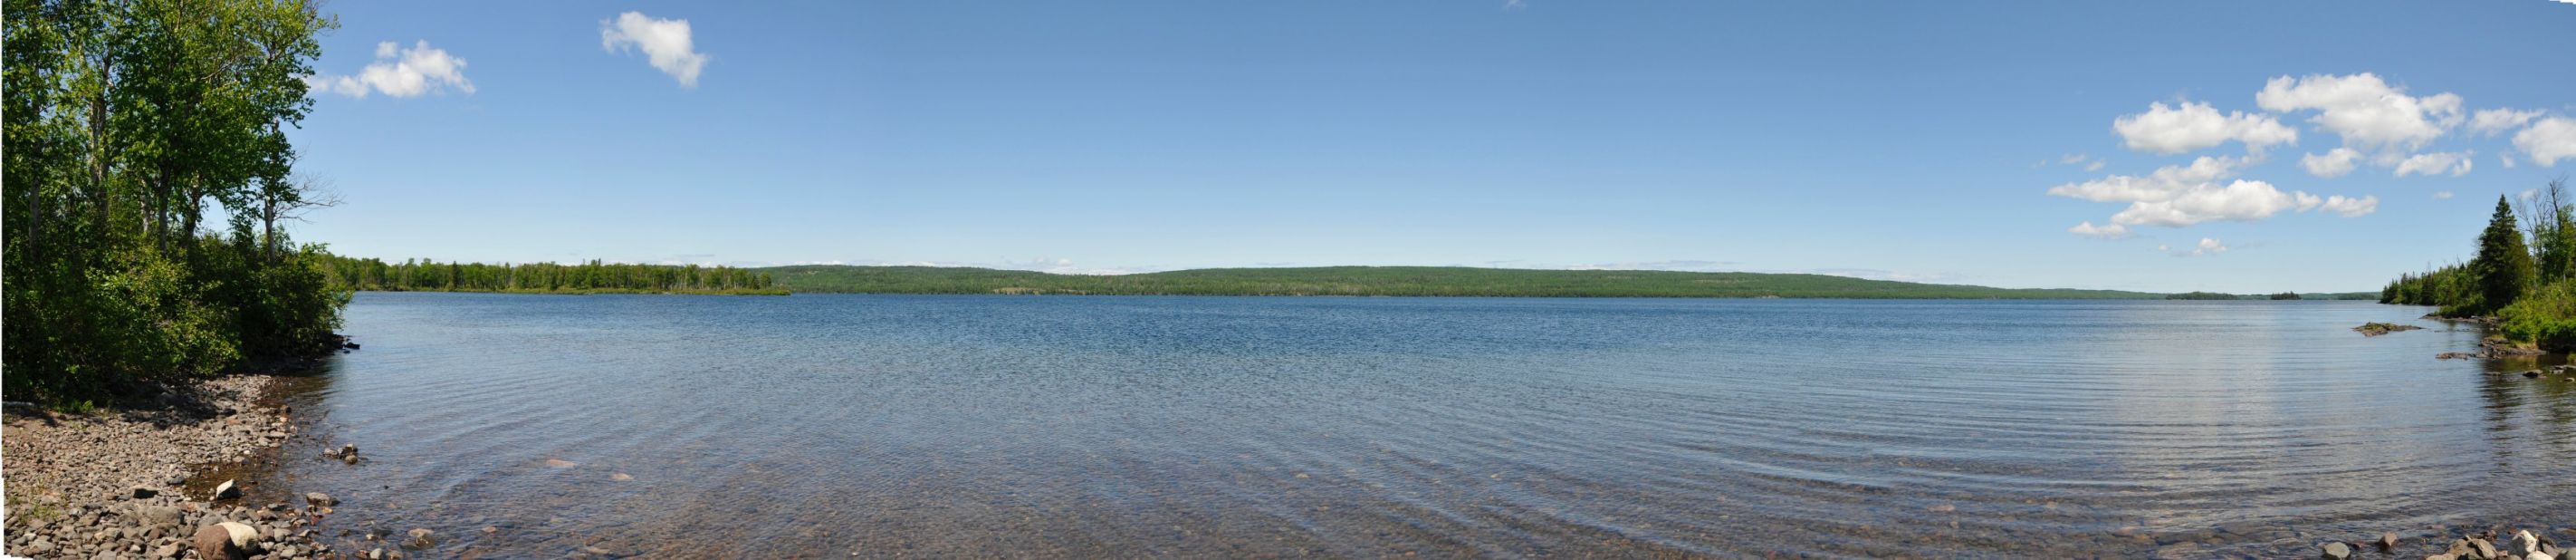 Isle Royale has hundreds of inland lakes, ponds and bogs, but Siskiwit Lake is the largest body of water on the island.